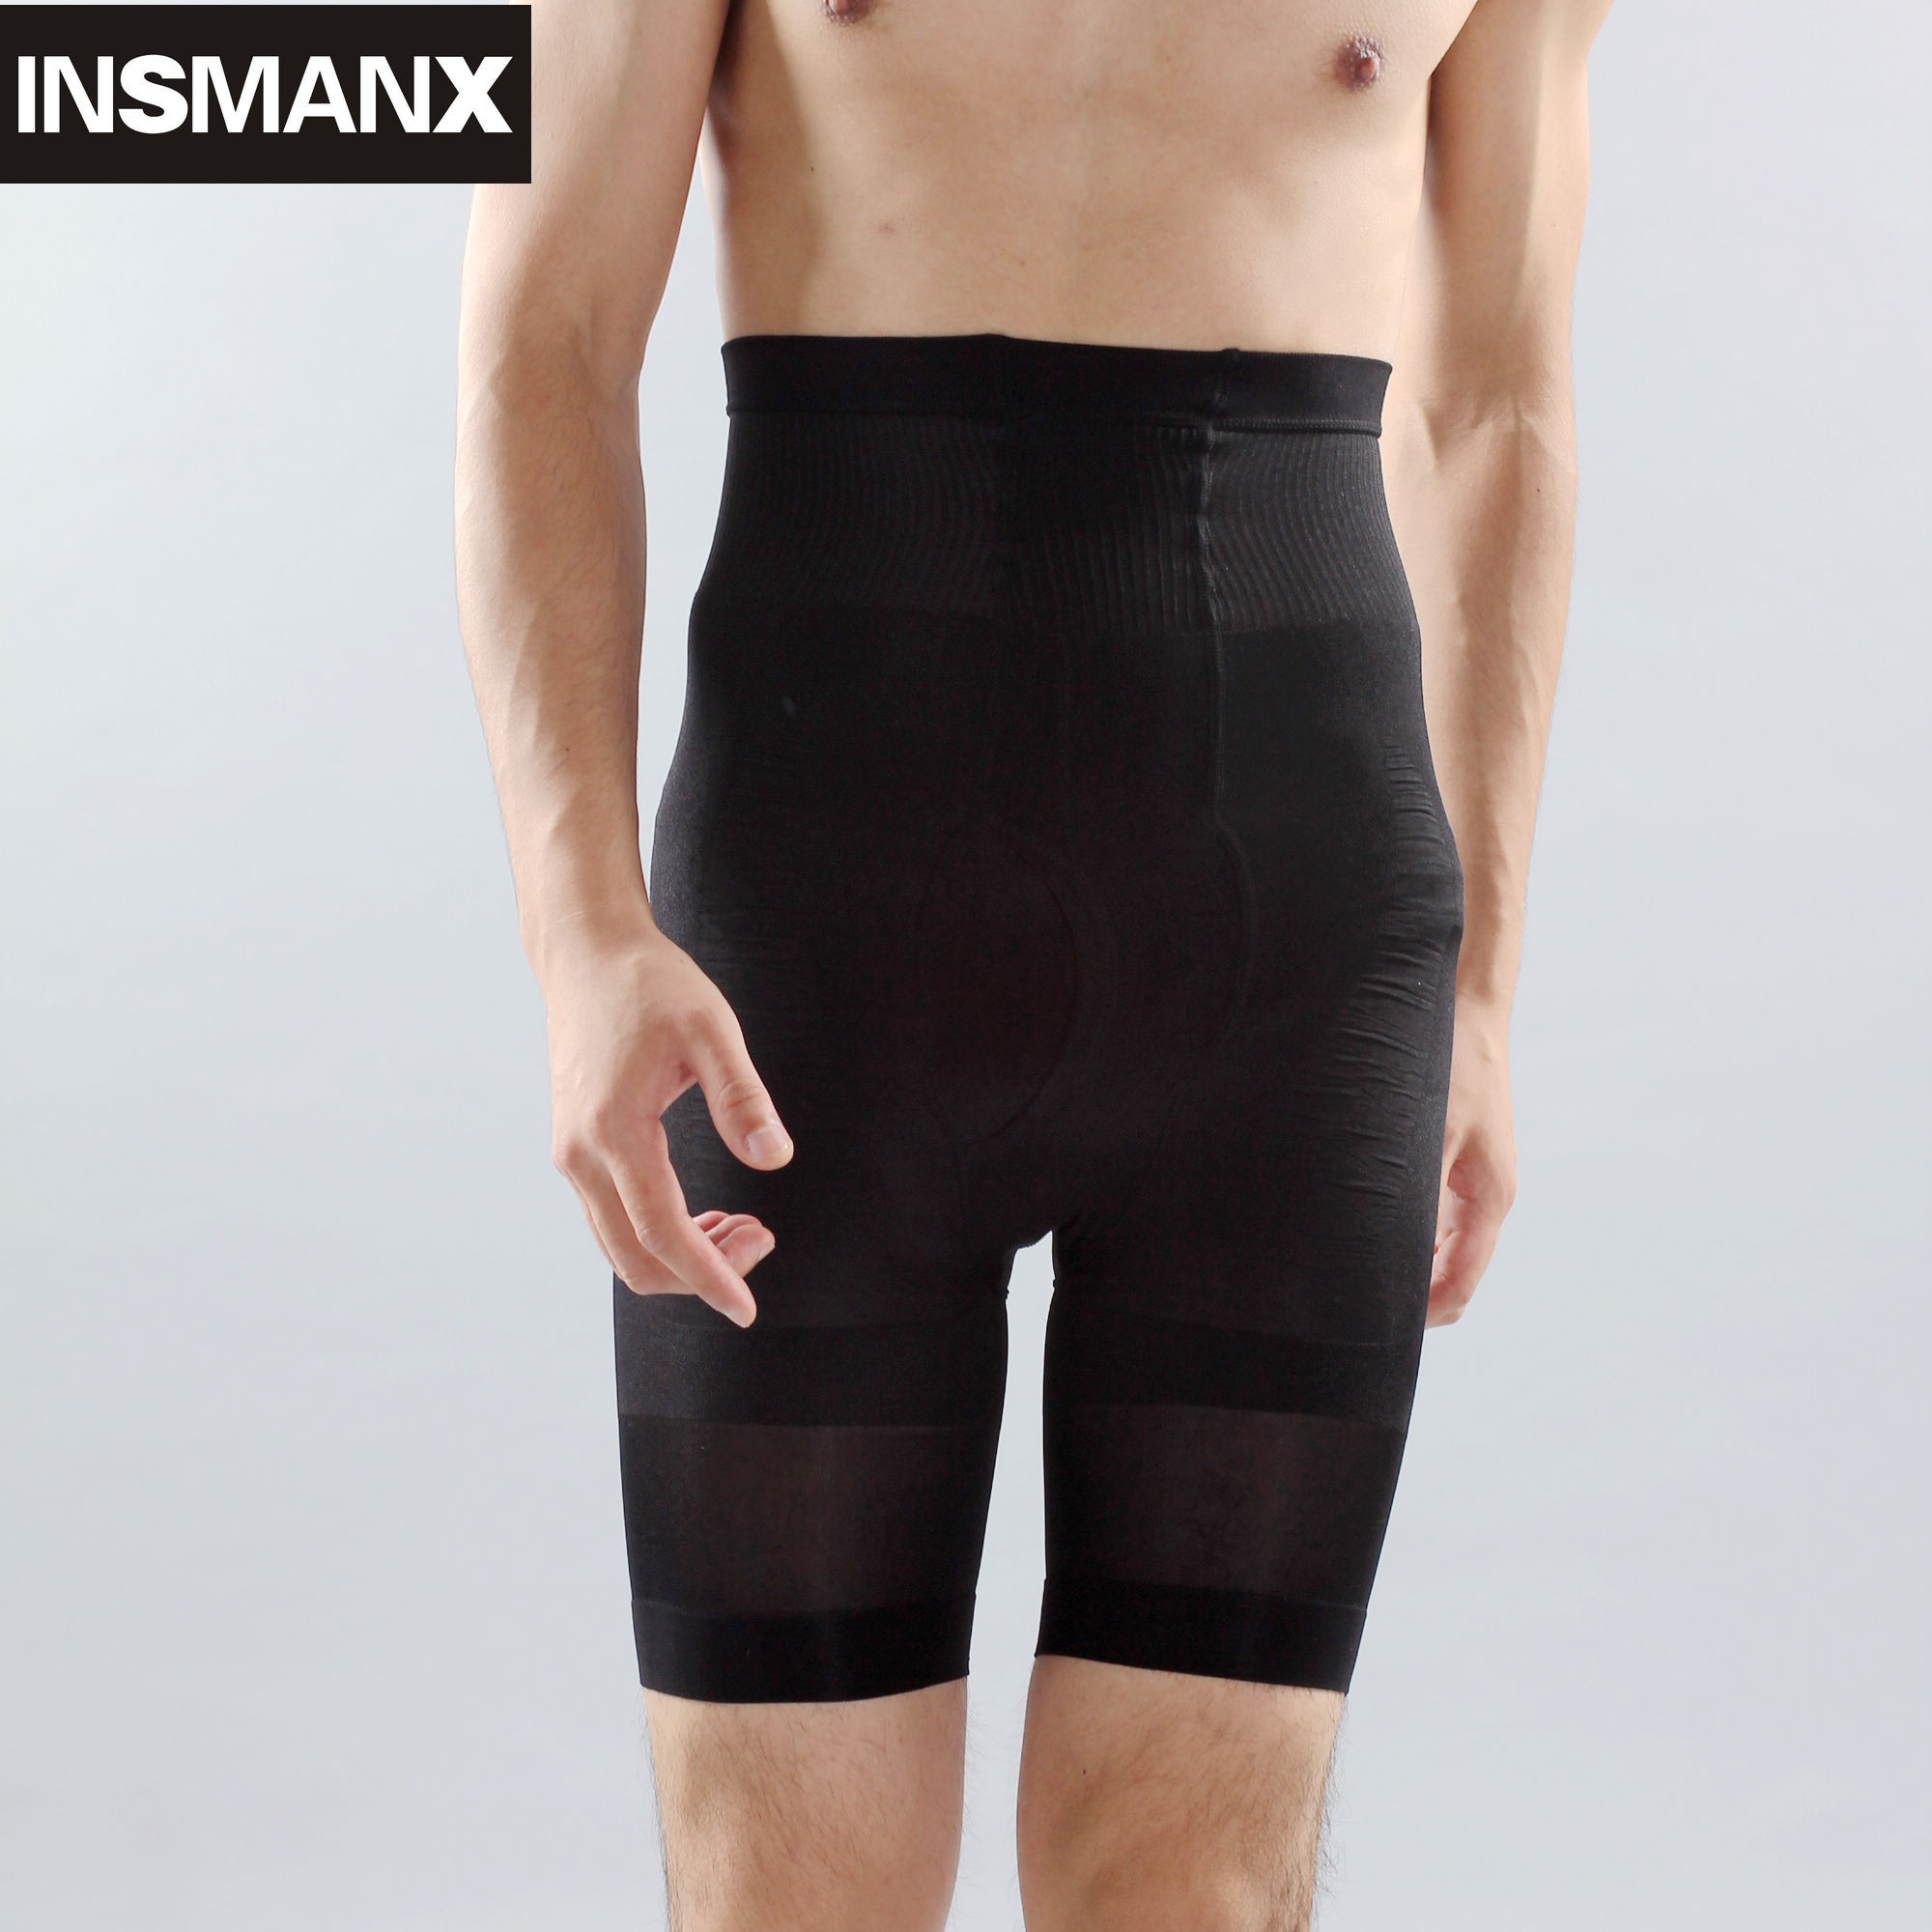 Insmanx male body shaping pants underwear high waist abdomen drawing pants beauty care skin tight knee-length pants beer